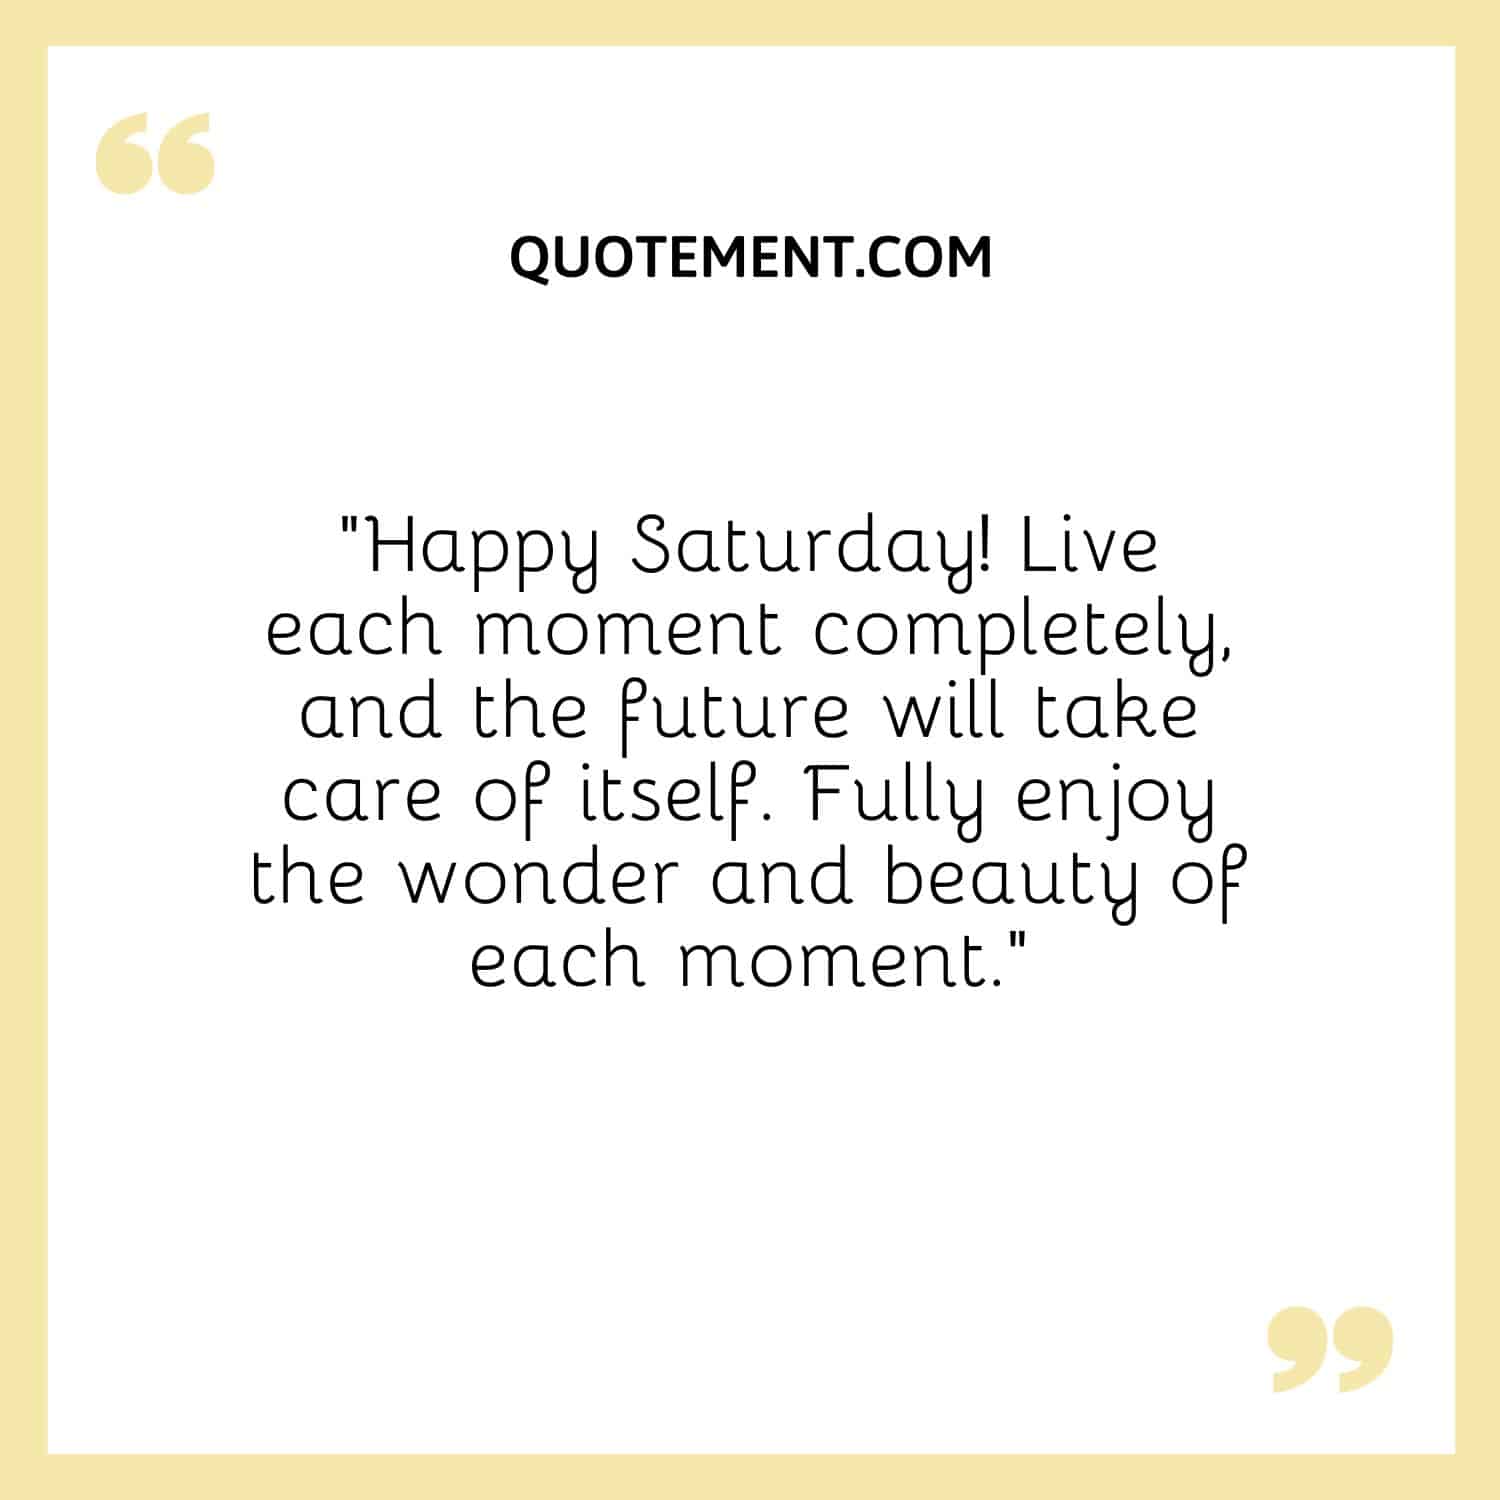 “Happy Saturday! Live each moment completely, and the future will take care of itself. Fully enjoy the wonder and beauty of each moment.”